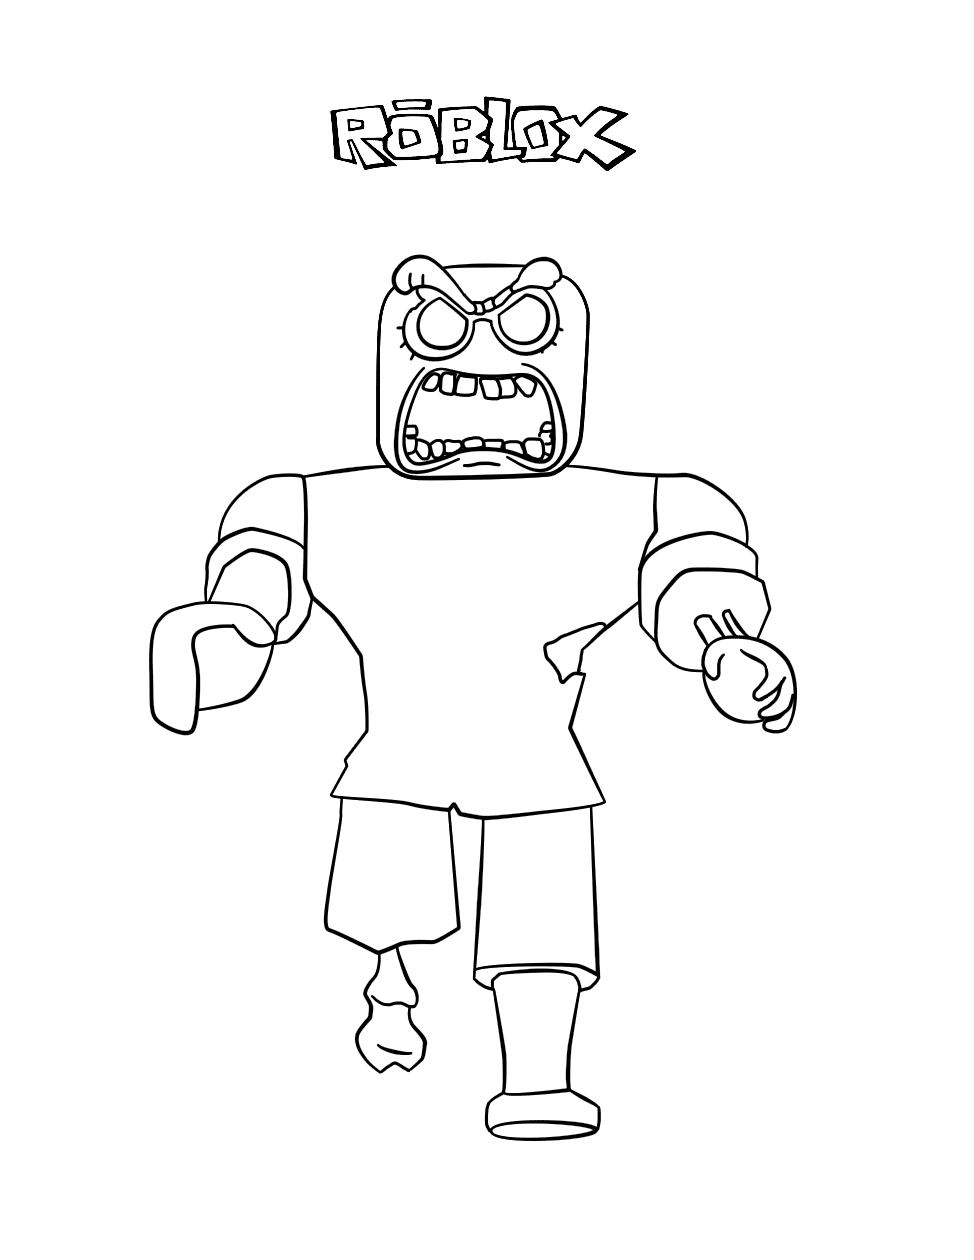 The Roblox Zombie shows its teeth Coloring Page